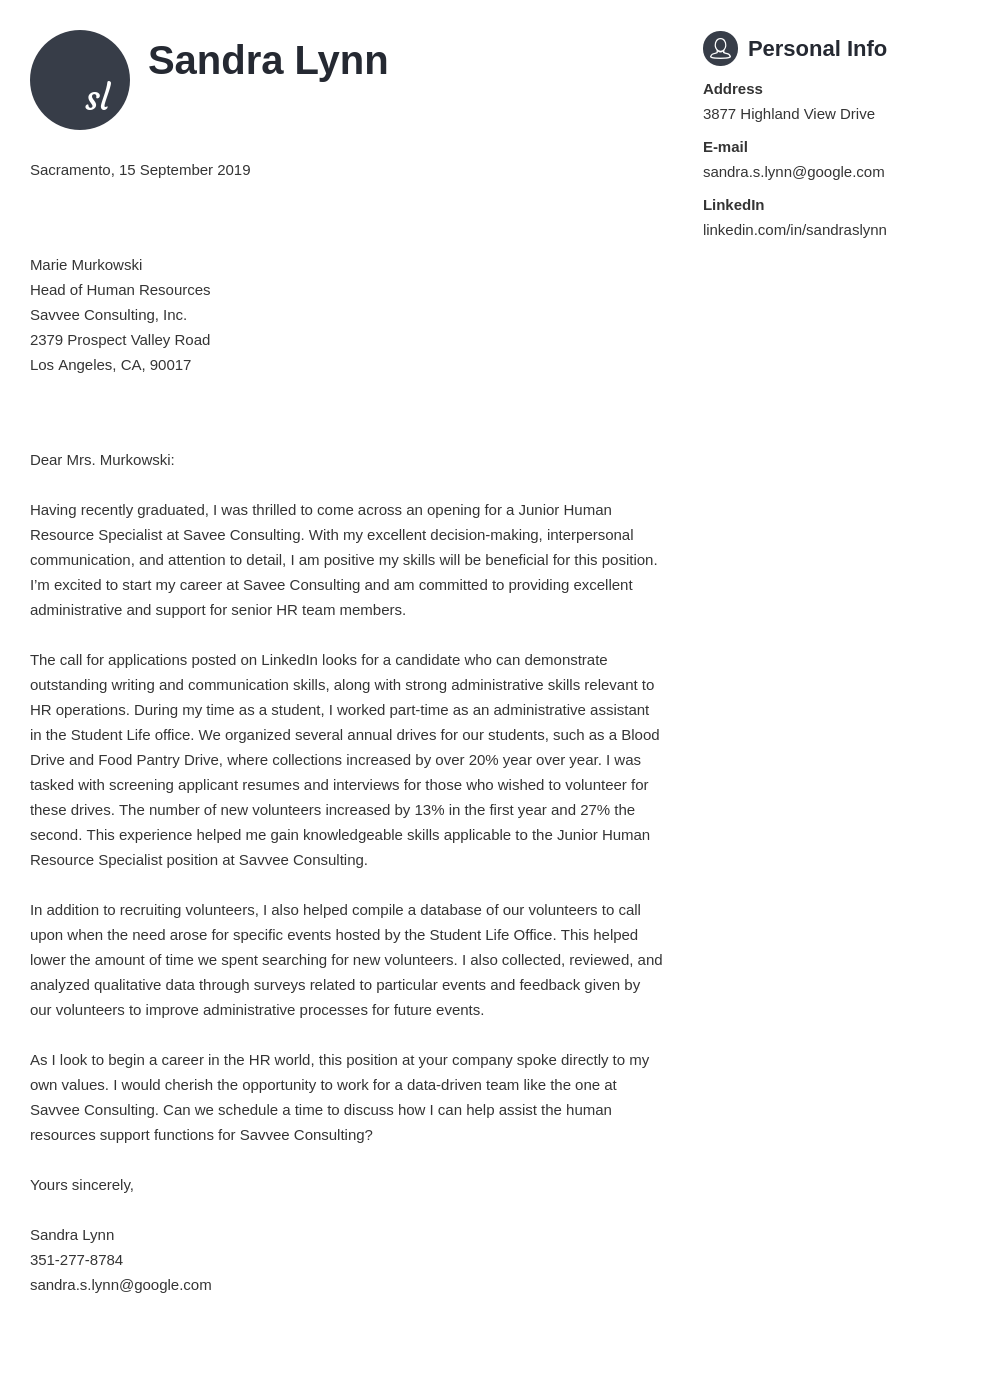 Human Resources Cover Letter: Examples & Ready-To-Use Templates